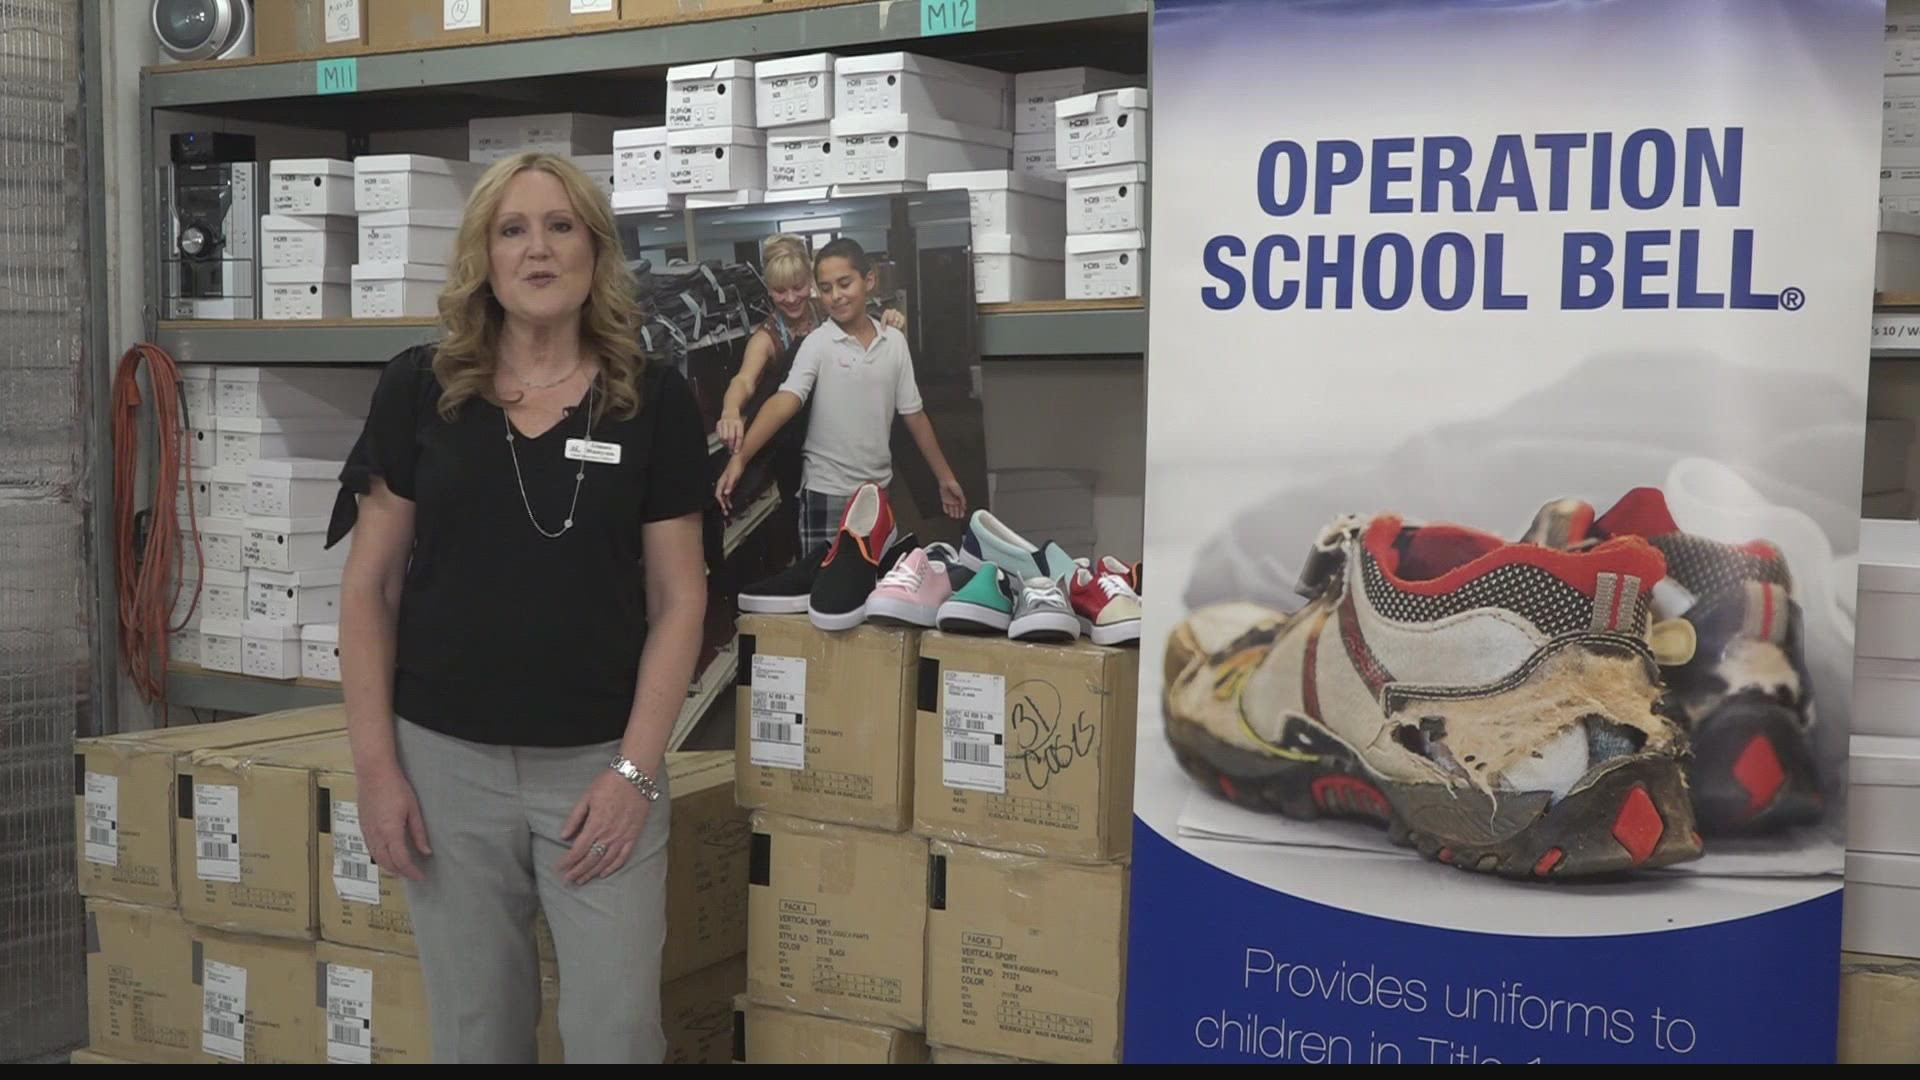 Operation School Bell provides school wardrobes for students in need across the Valley. Jen Wahl has the details.